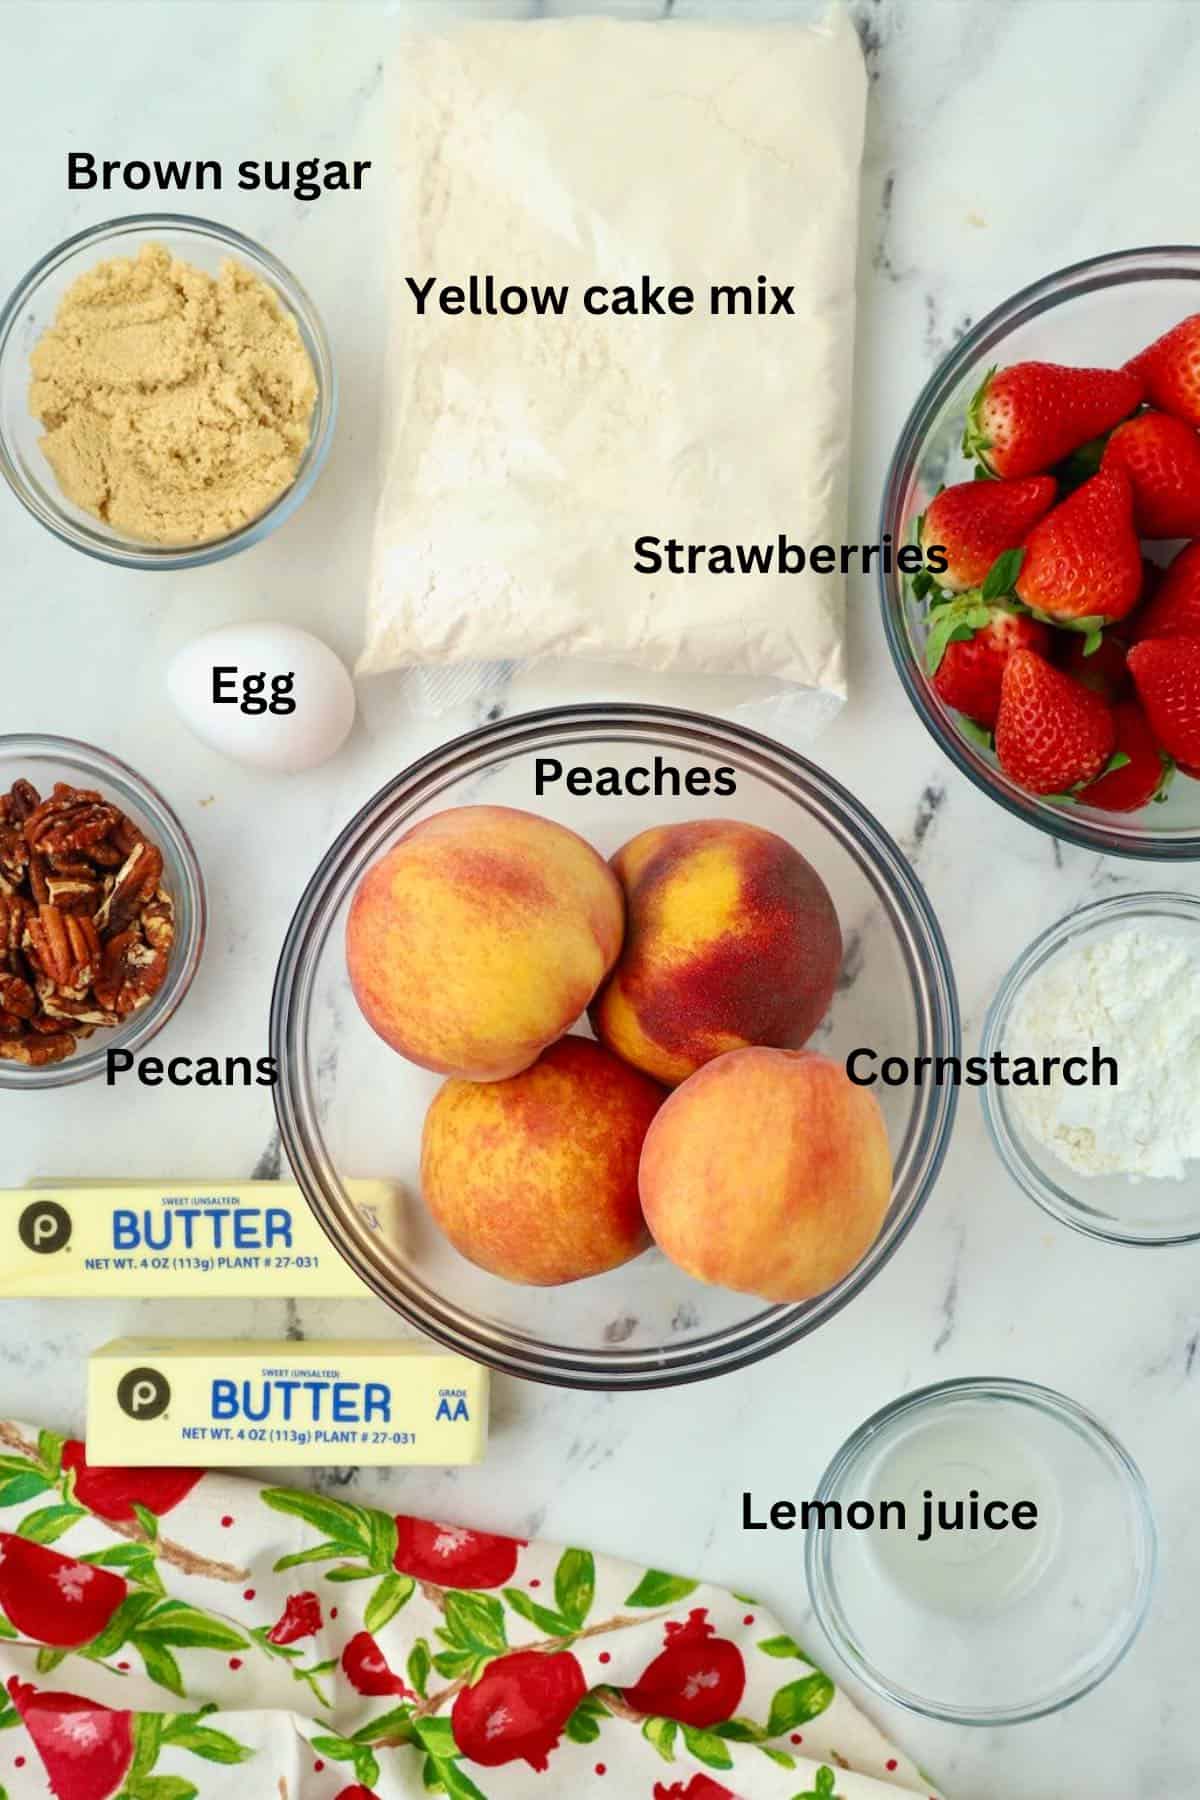 Fruit cobbler ingredients include peaches, strawberries, cake mix, and butter. 